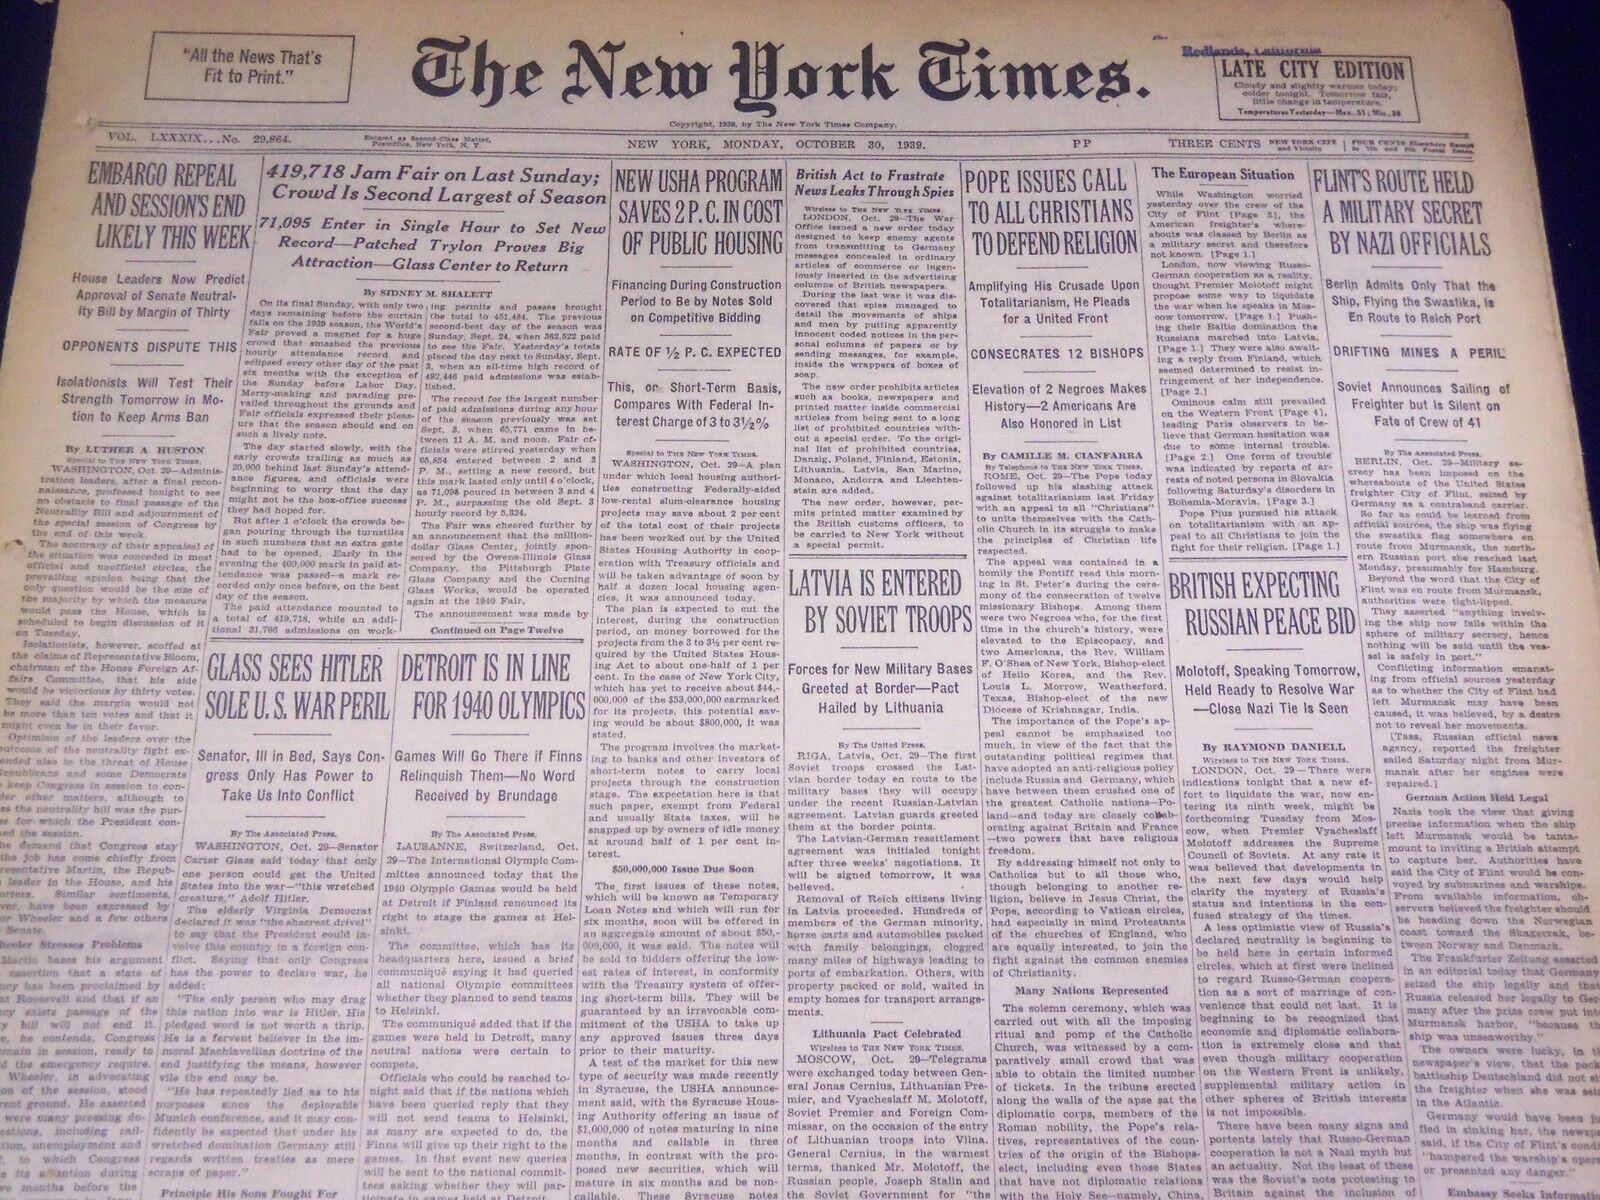 1939 OCTOBER 30 NEW YORK TIMES - 2ND LARGEST CROWD AT FAIR - NT 3692